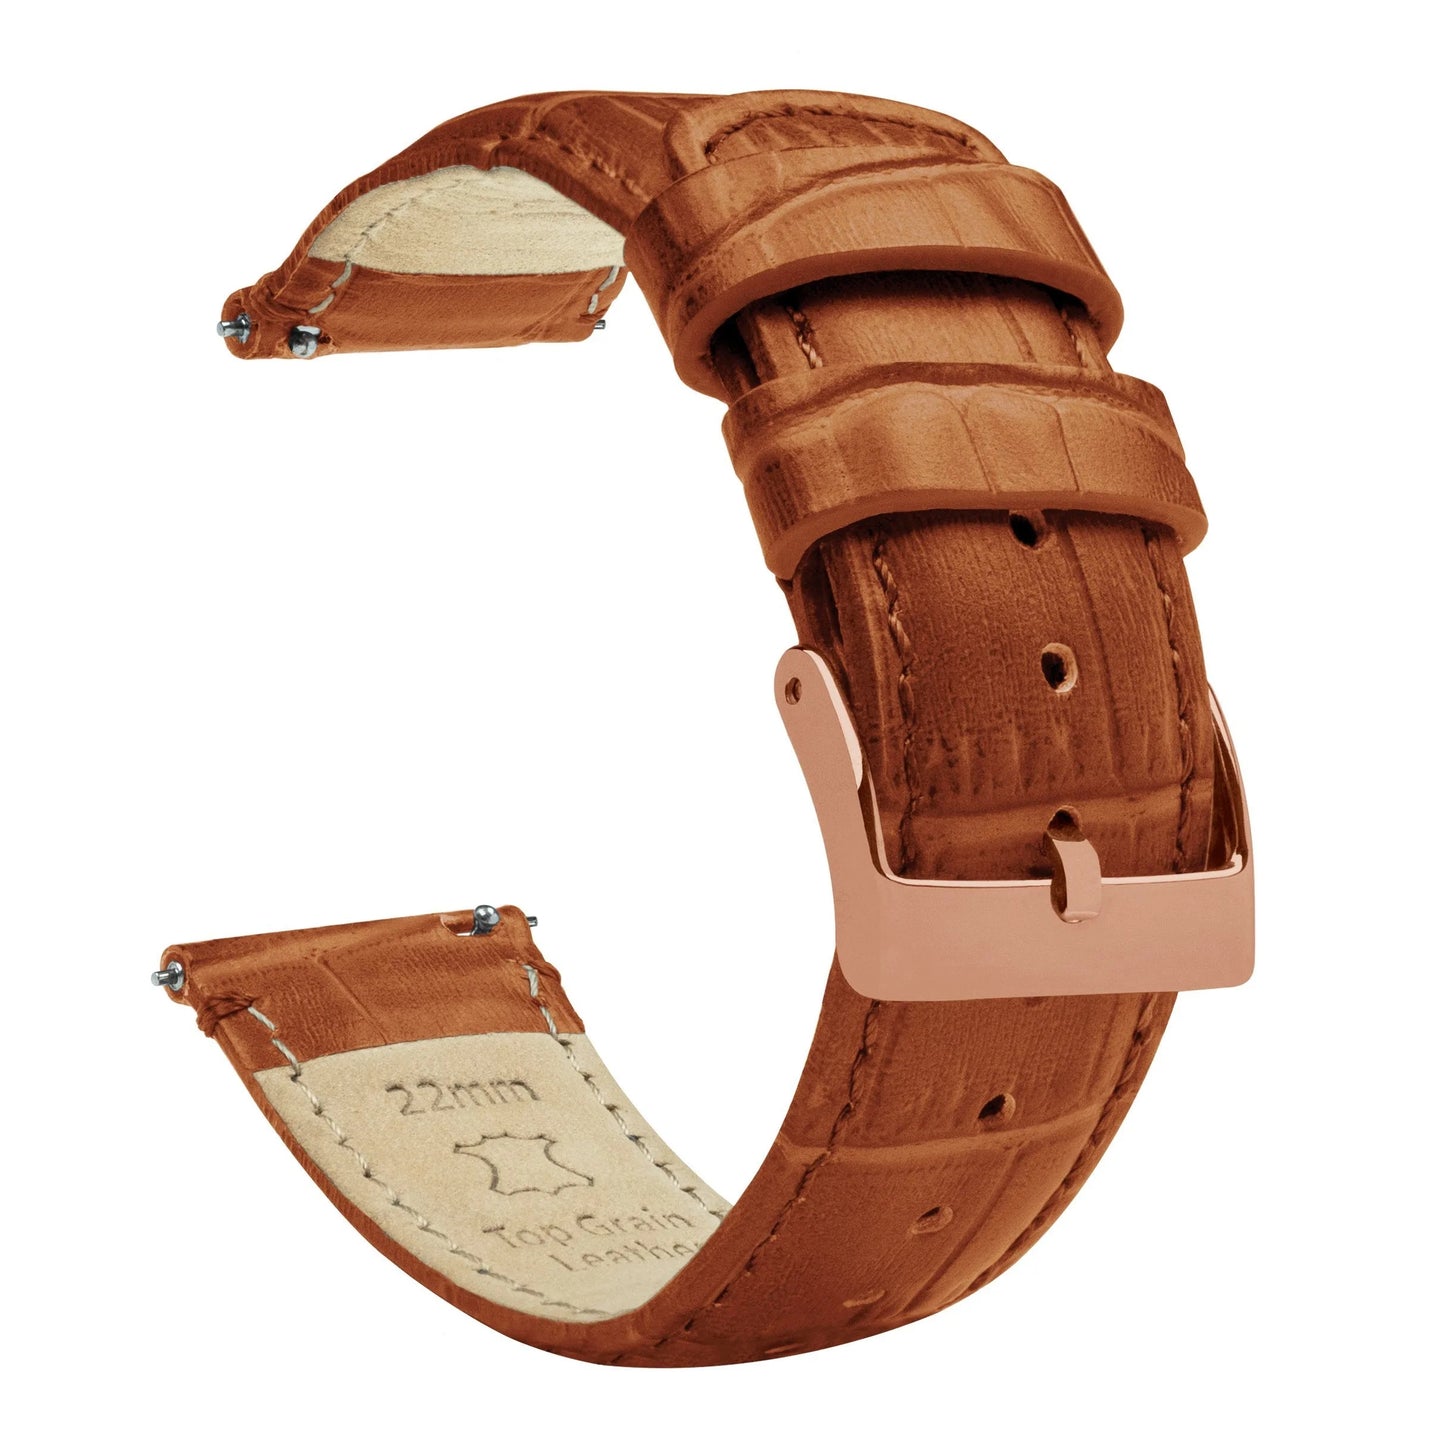 Fossil Sport | Toffee Brown Alligator Grain Leather - Barton Watch Bands